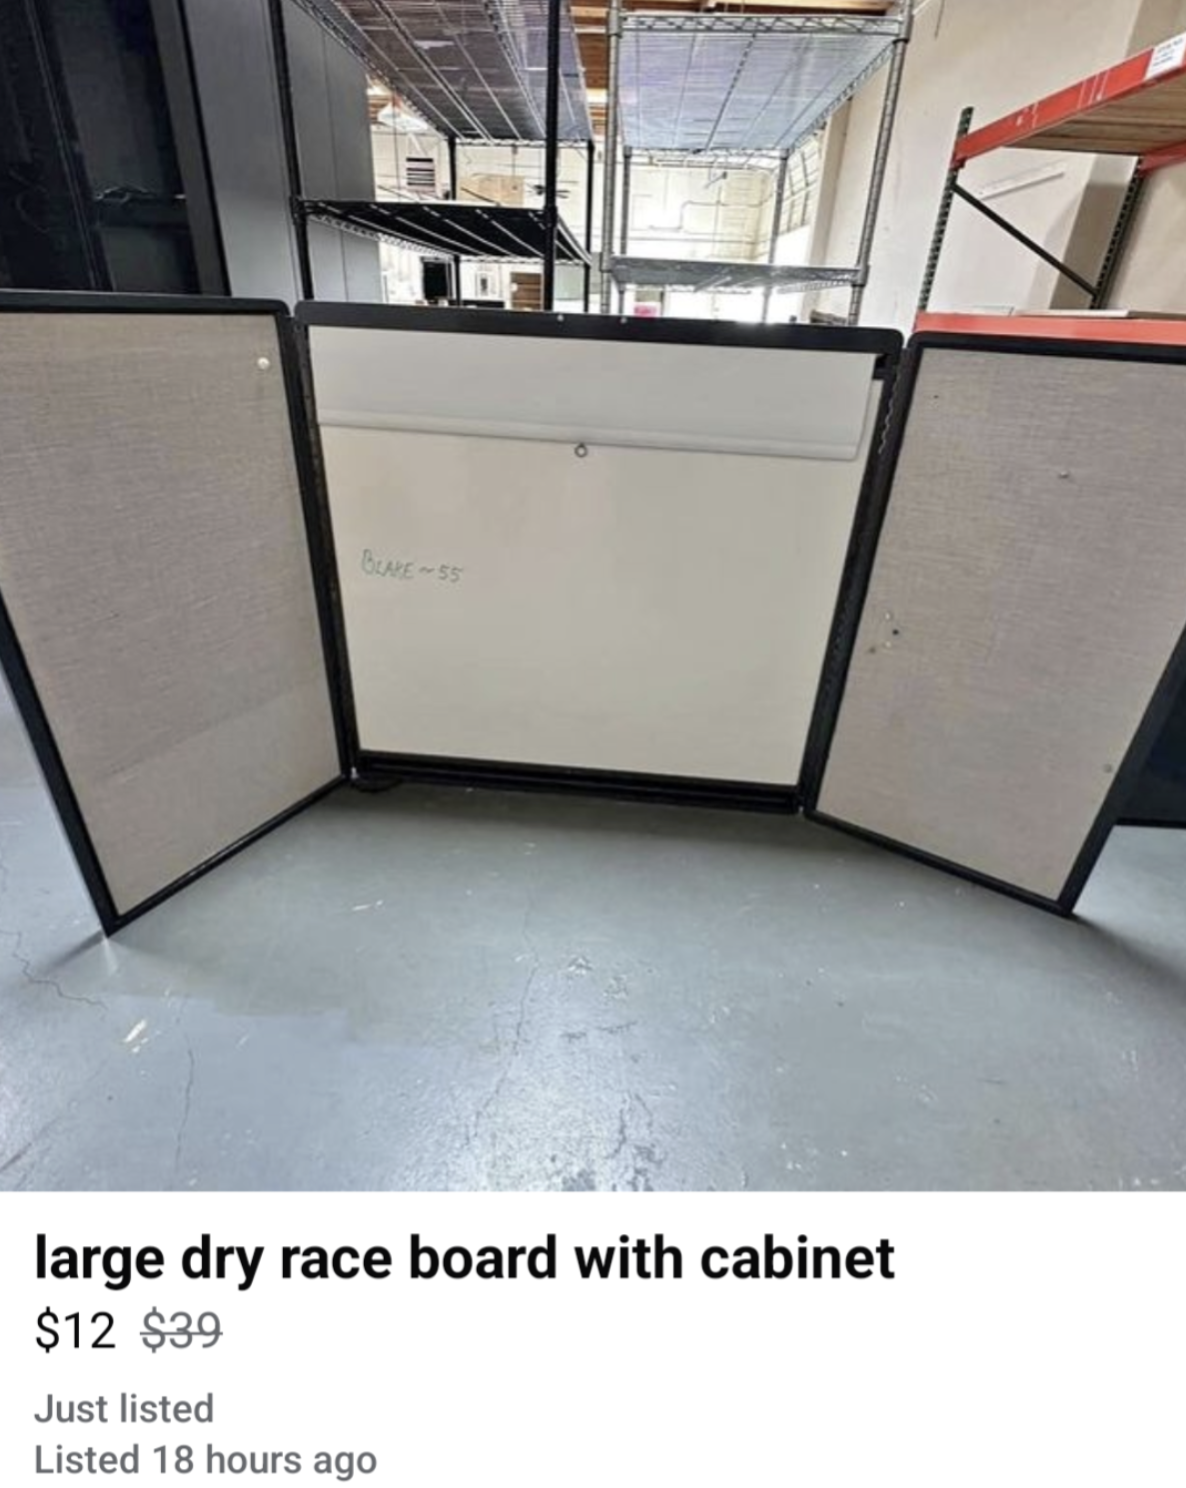 floor - large dry race board with cabinet $12 $39 Just listed Listed 18 hours ago